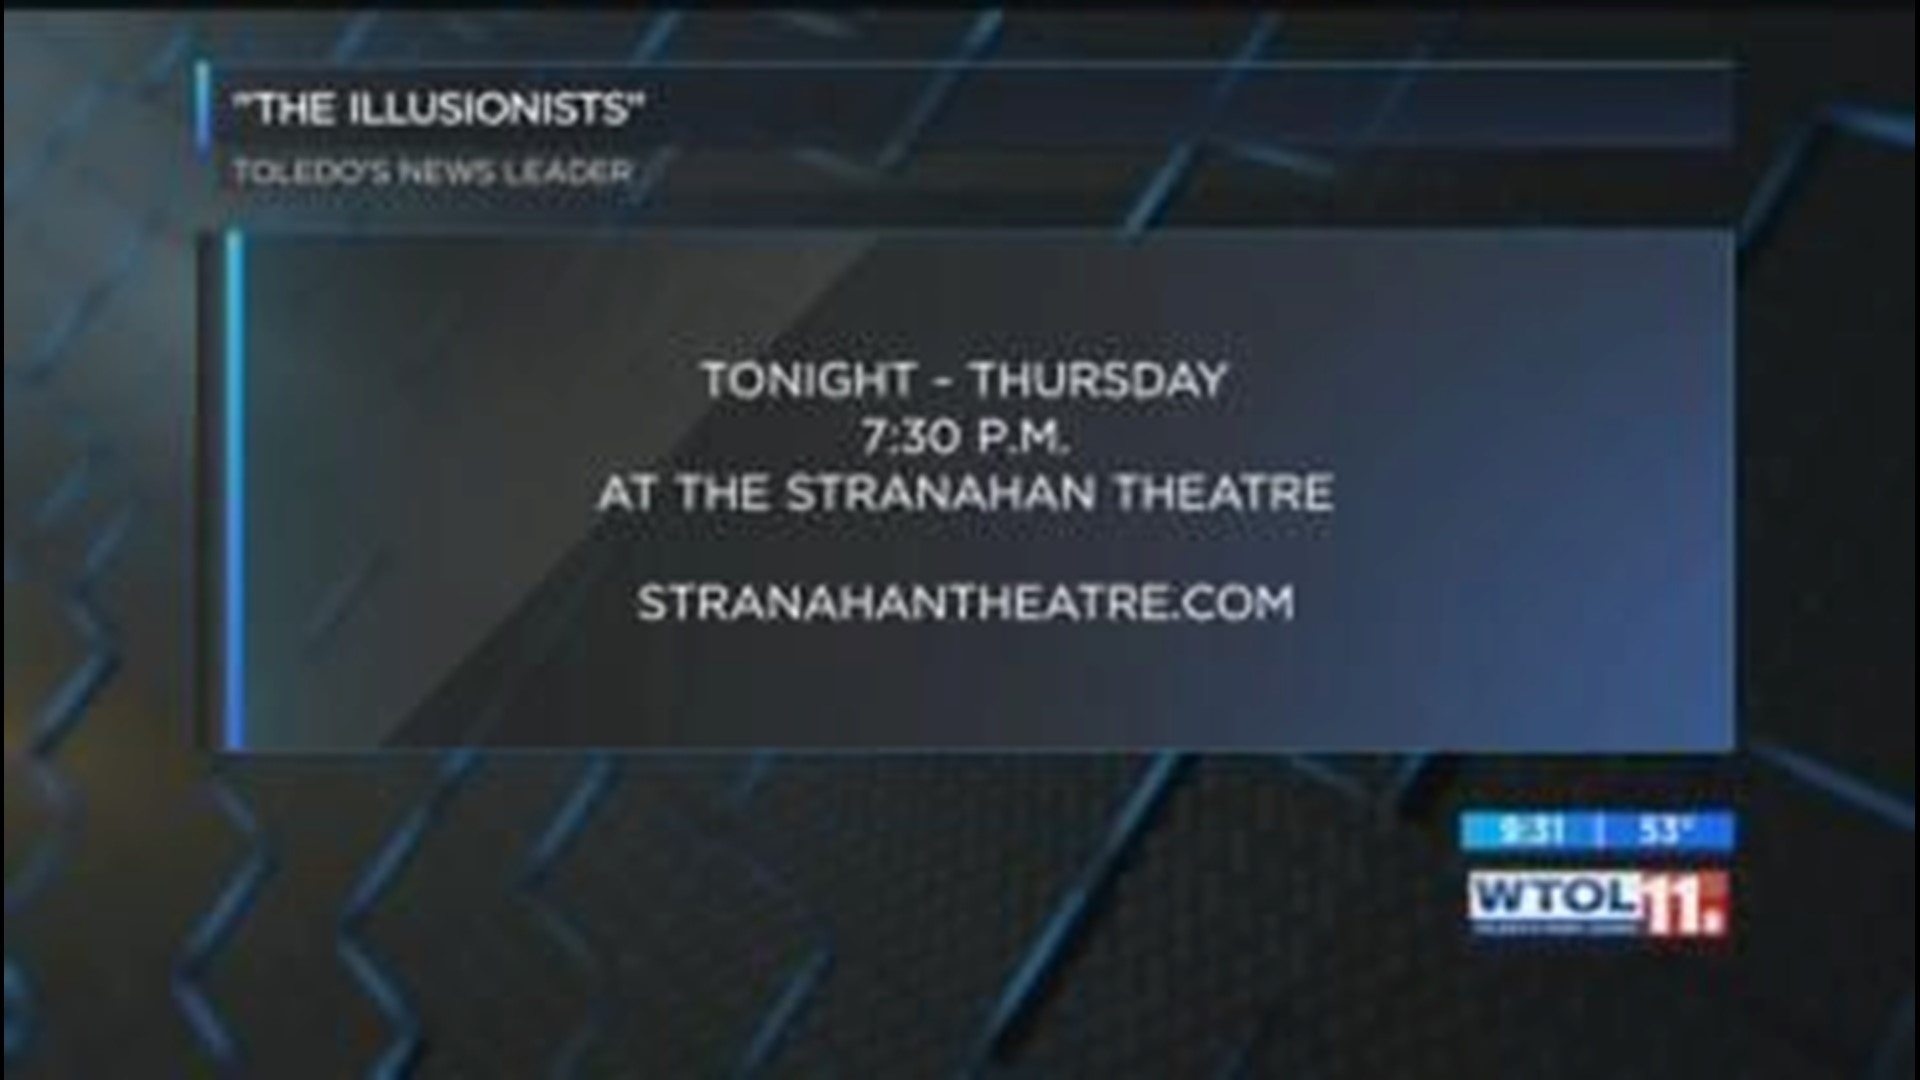 Witness magic with the Illusionists at the Stranahan